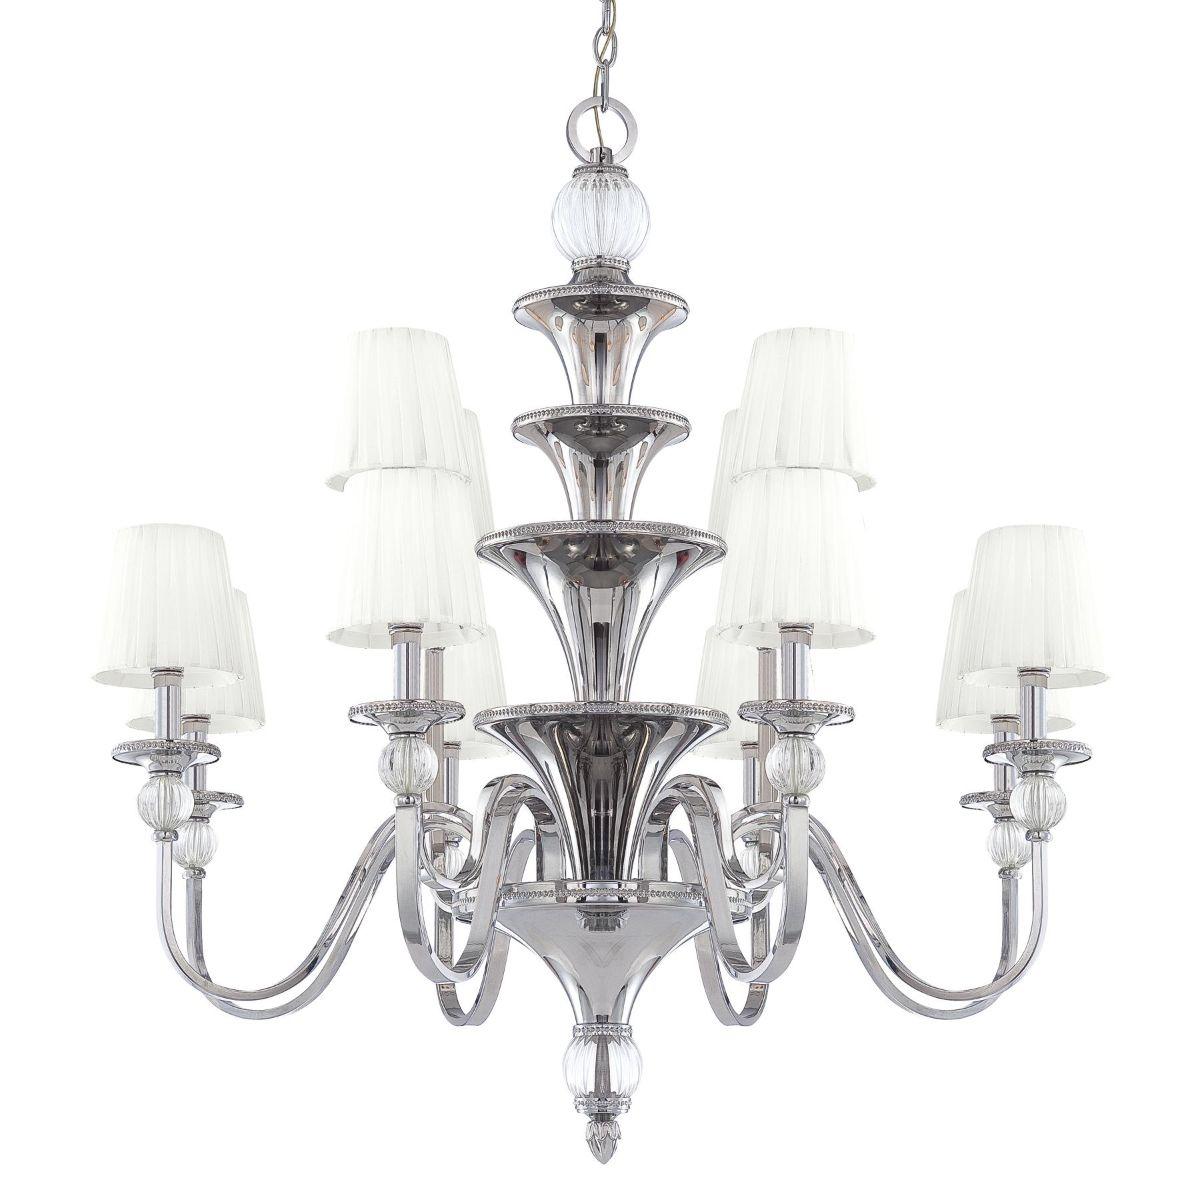 Aise 39 in. 12 lights Chandelier Polished Nickel finish